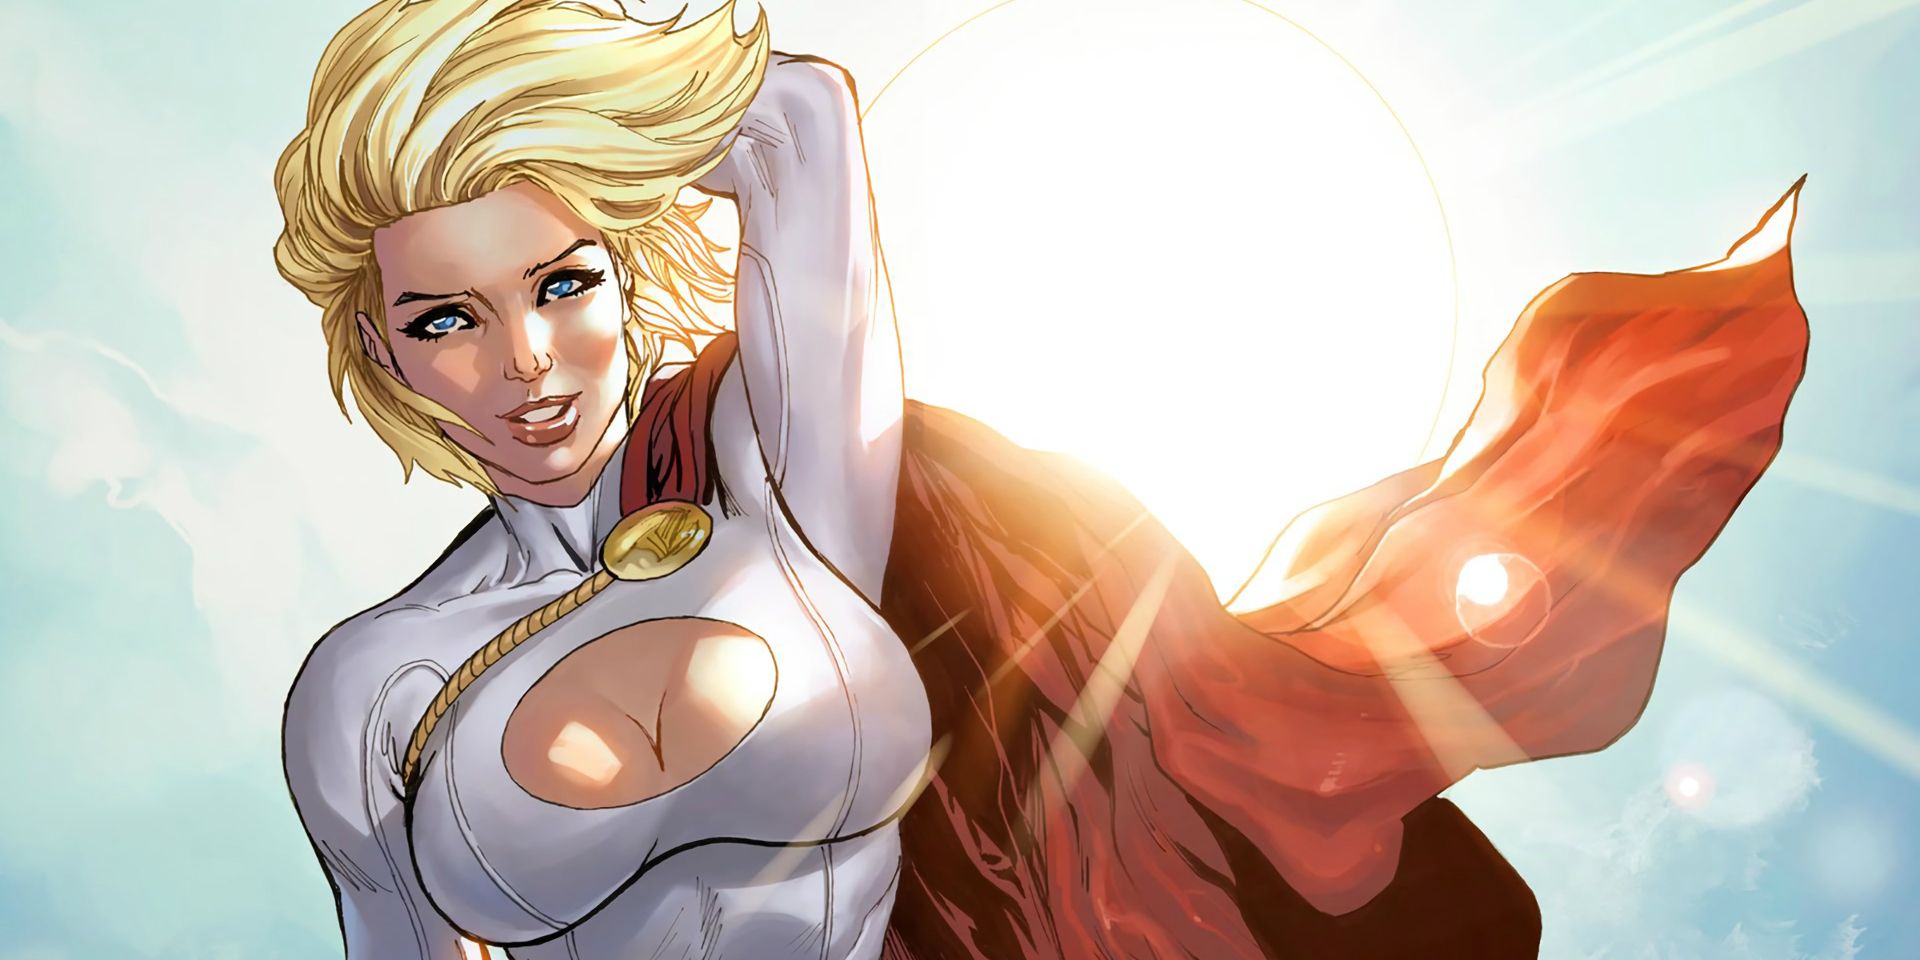 Power Girl smiles while hovering in the sky in DC Comics